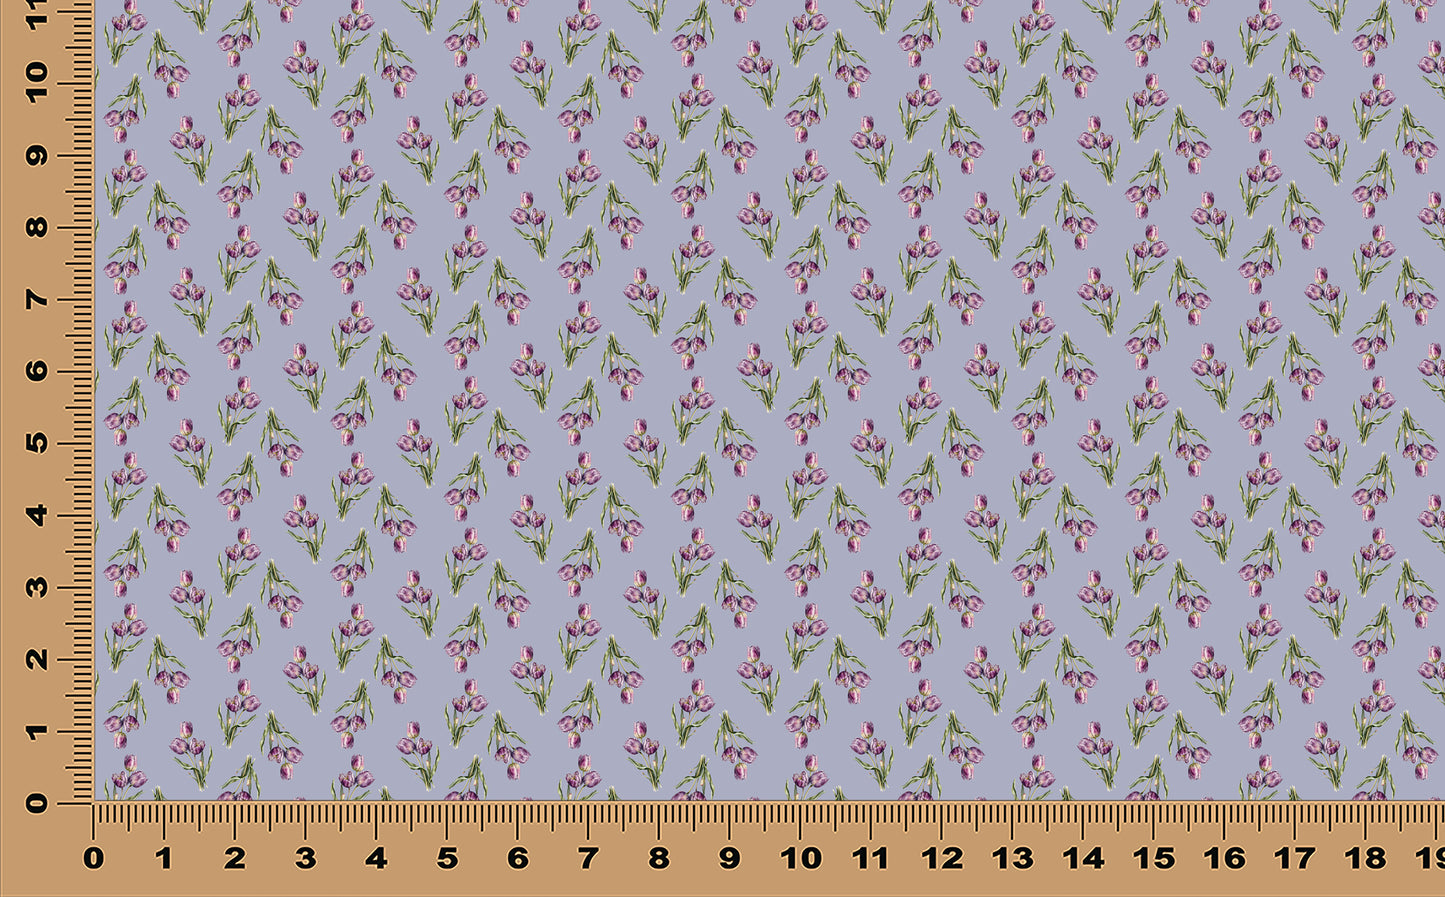 DecoCraft - Flowers & Greenery - Scattered - Purple Tulips